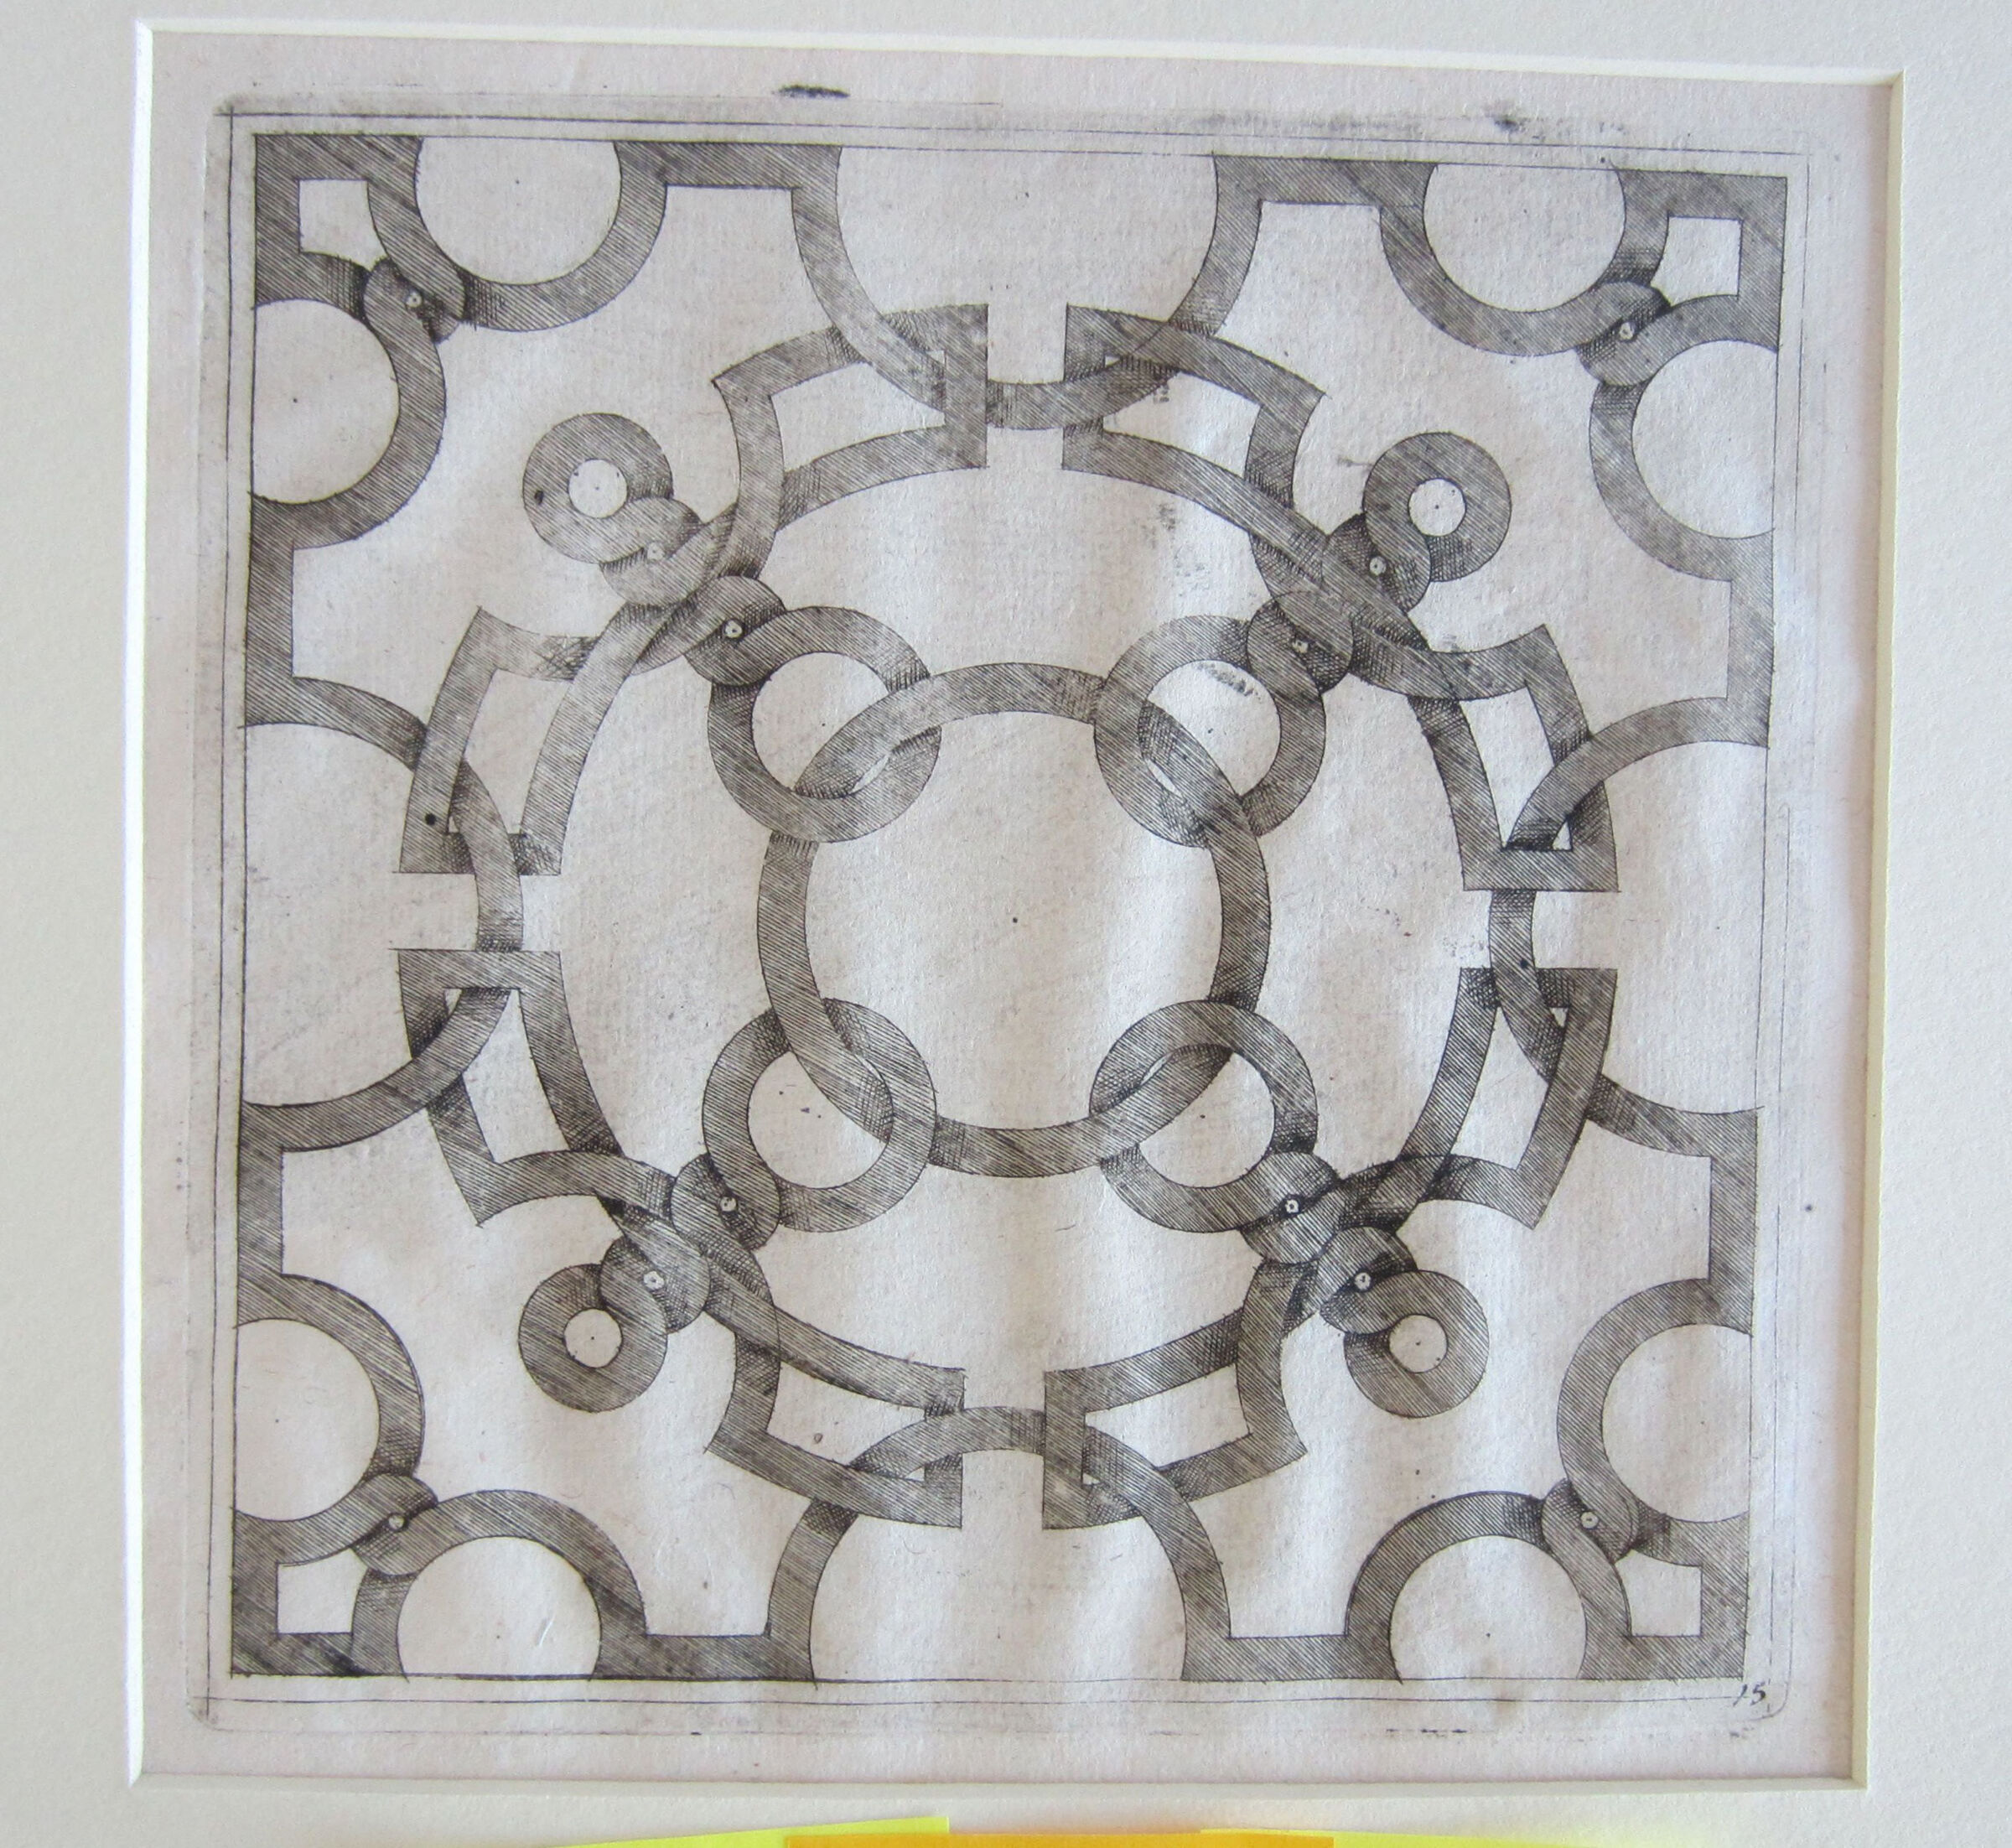 Interlace Centered By A Circle Linked To The Outer Circular Form By Four Circular Elements